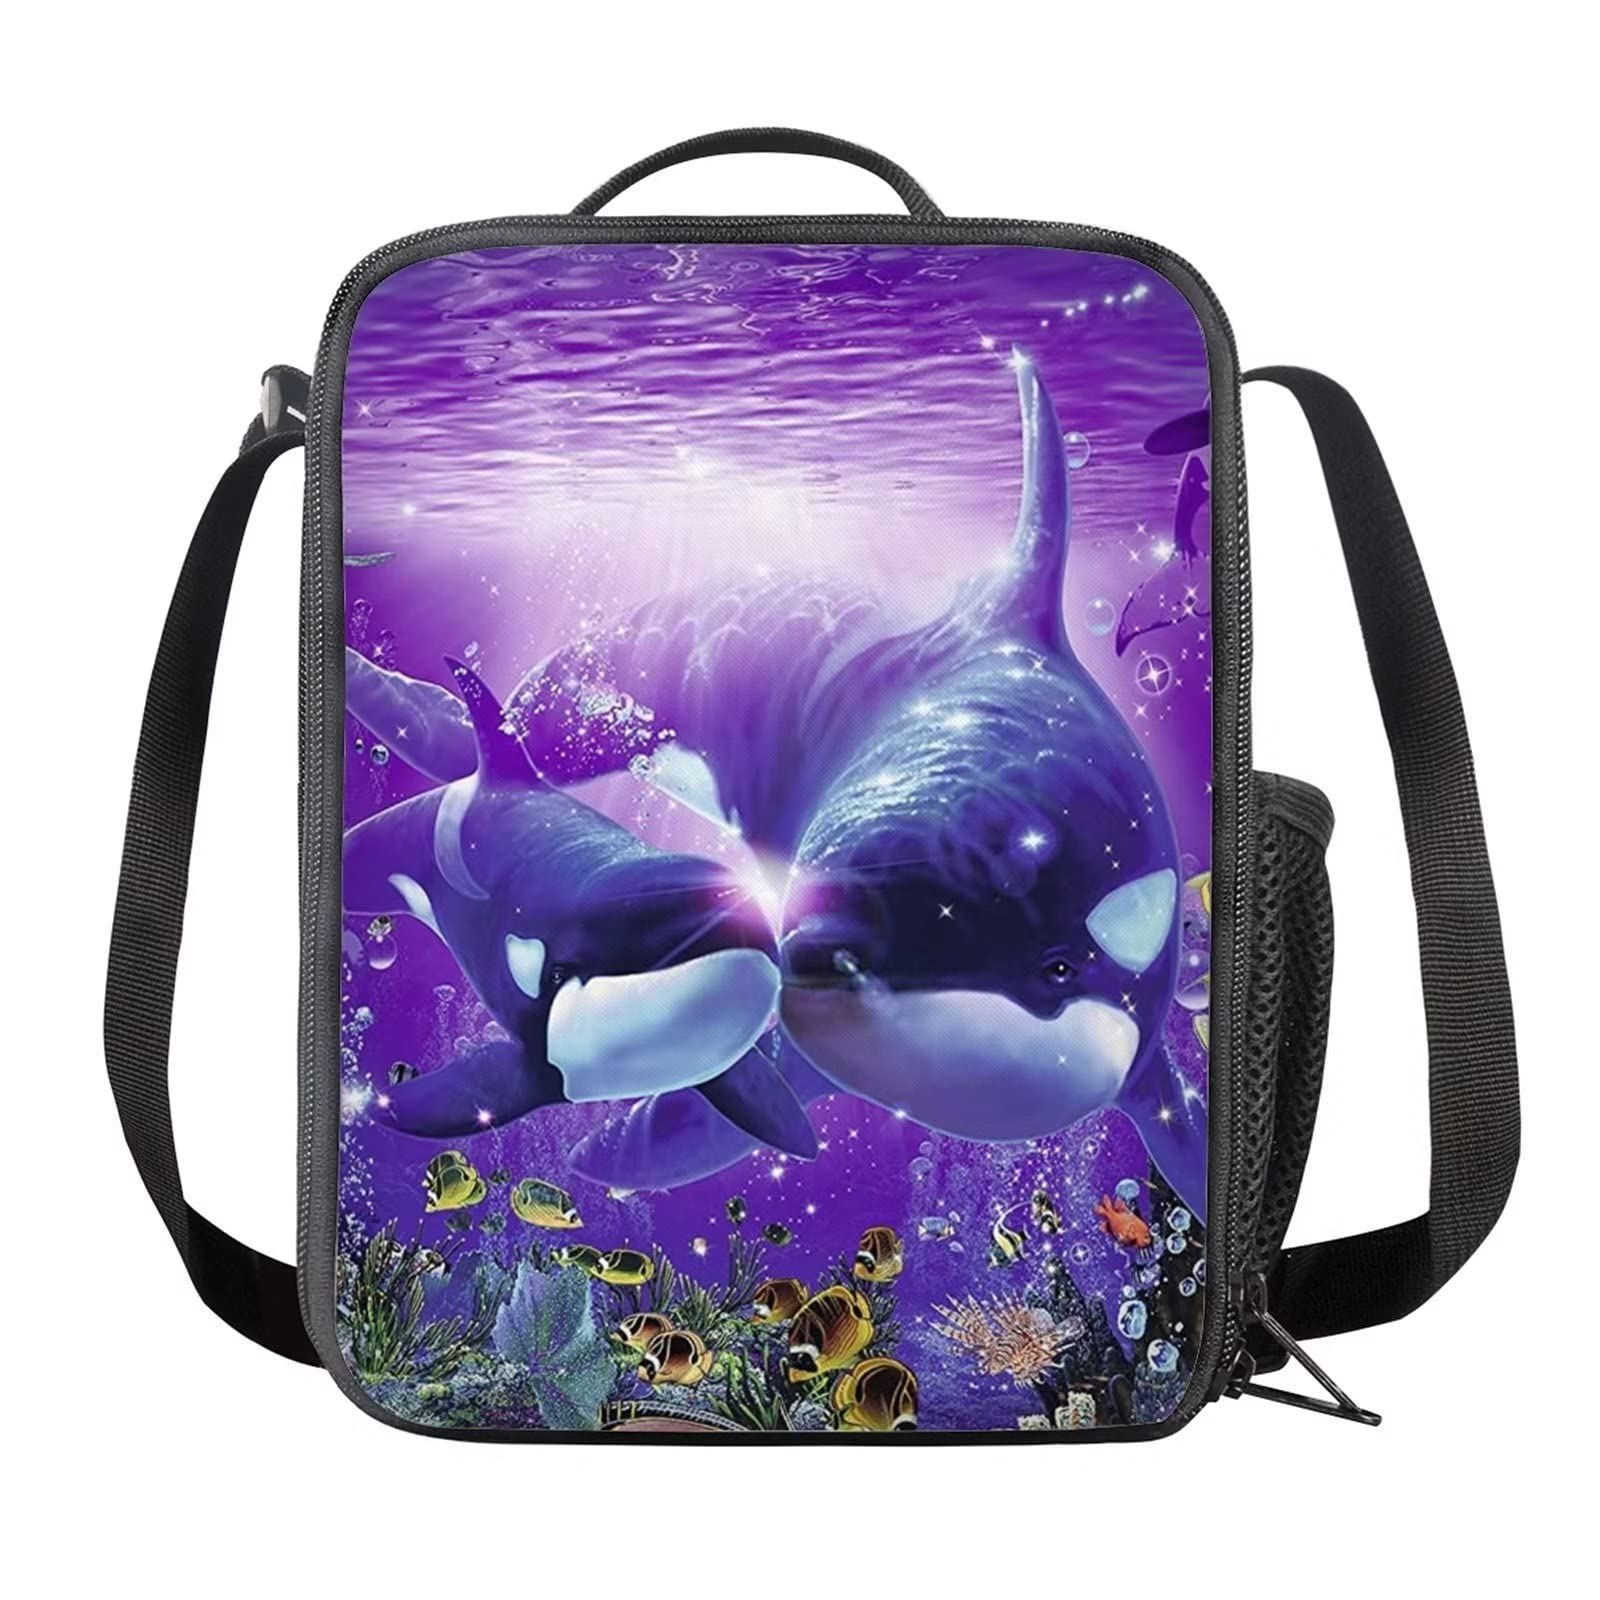 ZFRXIGN Killer Whale Lunch Bag Girly Stuff Insulated Lunch Box Tote Bag Purple Lunch Holder for Beach, Party, Boating, Office, Fishing, Picnic - Orca